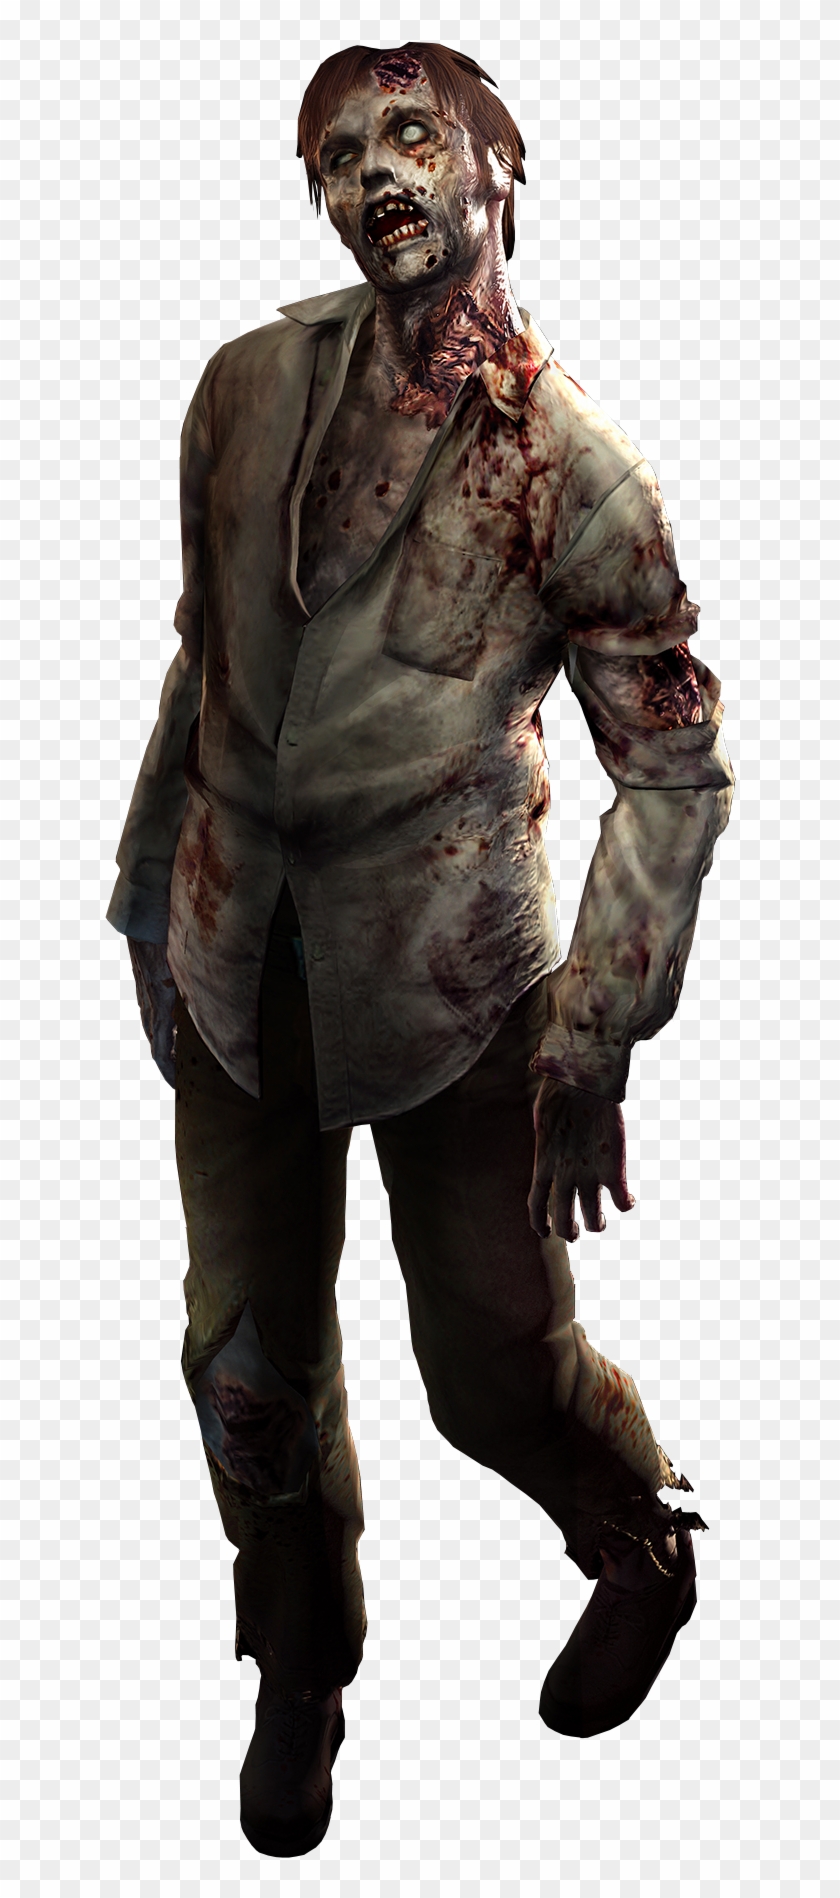 Zombie - Resident Evil Gamecube Cover Clipart